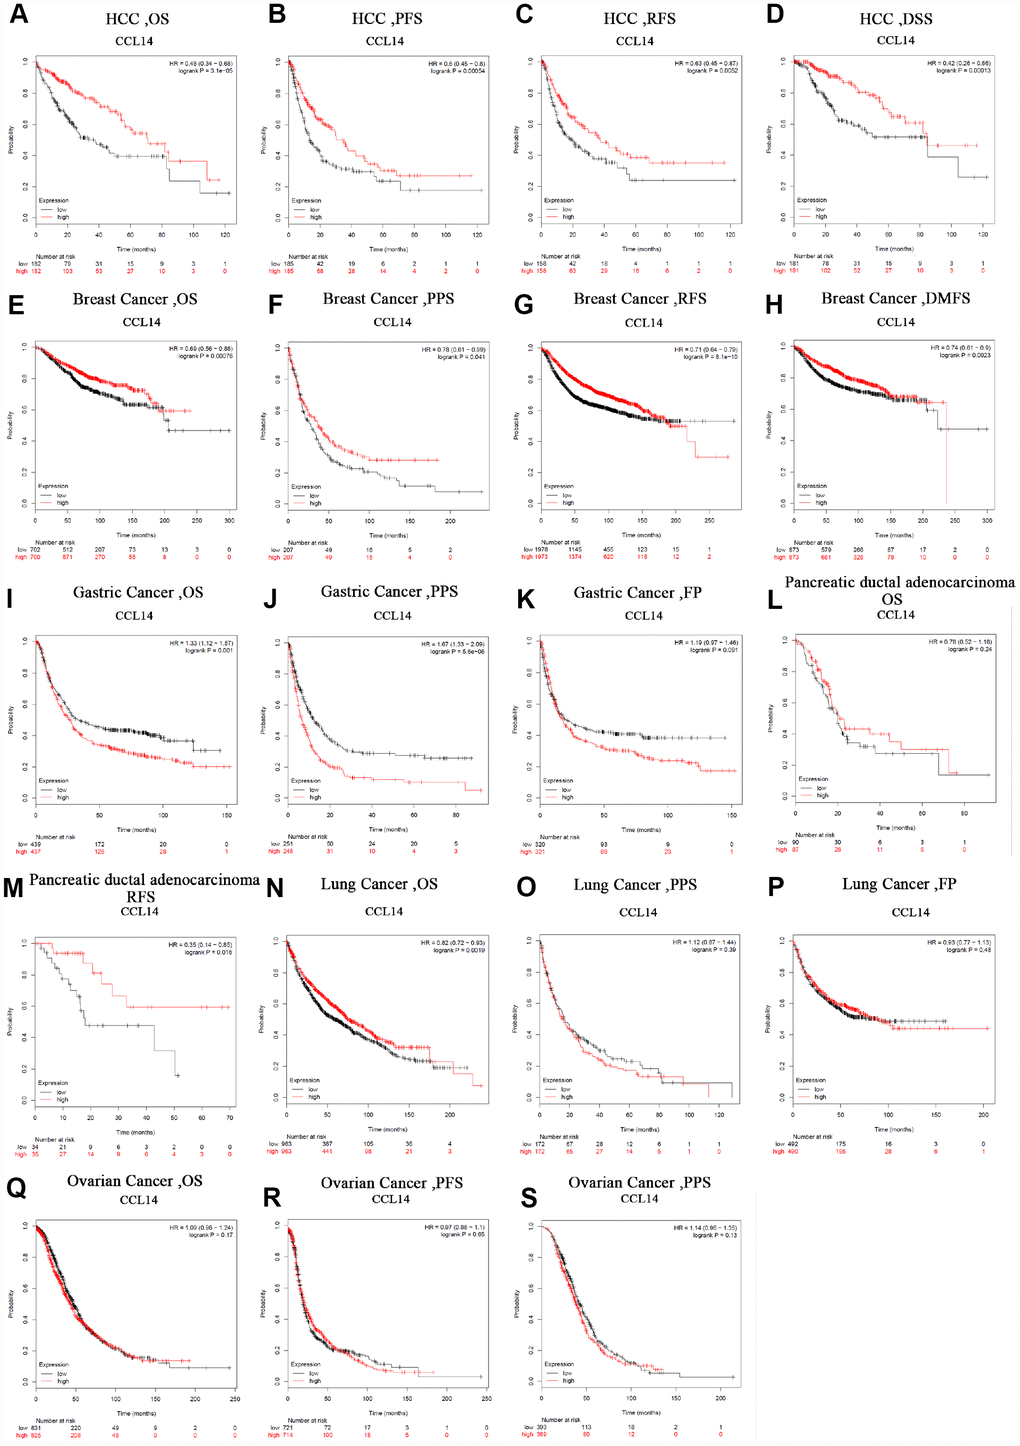 Kaplan-Meier survival curve analysis of the prognostic significance of high and low expression of CCL14 in different types of human cancers using the Kaplan-Meier plotter database (A-S). (A–D) High CCL14 expression was correlated with better OS, PFS, RFS and DSS in HCC cohorts (n=364, n=370, n=316, n=362). (E–H) Survival curves of OS, PPS, RFS and DMFS in the breast cancer cohort (n=1,404, n=414, n=3,915). (I–K) OS, PS and DFS survival curves of gastric cancer. High CCL14 expression was correlated with poor OS and PS (n = 876, n = 499, n=641). (L, M) OS and RFS survival curves of ductal adenocarcinoma (n = 69, n = 177). (N–P) OS, PPS and FP survival curves of lung cancer (n = 1,926, n = 344, n=982). (Q–S) OS, PFS and PPS survival curves of ovarian cancer (n = 1,656, n = 1,435, n=782). OS, overall survival; PFS, progression-free survival; RFS, relapse-free survival; DSS, disease-specific survival. DMFS, distant metastasis-free survival; PPS, post progression survival; FP, first progression.